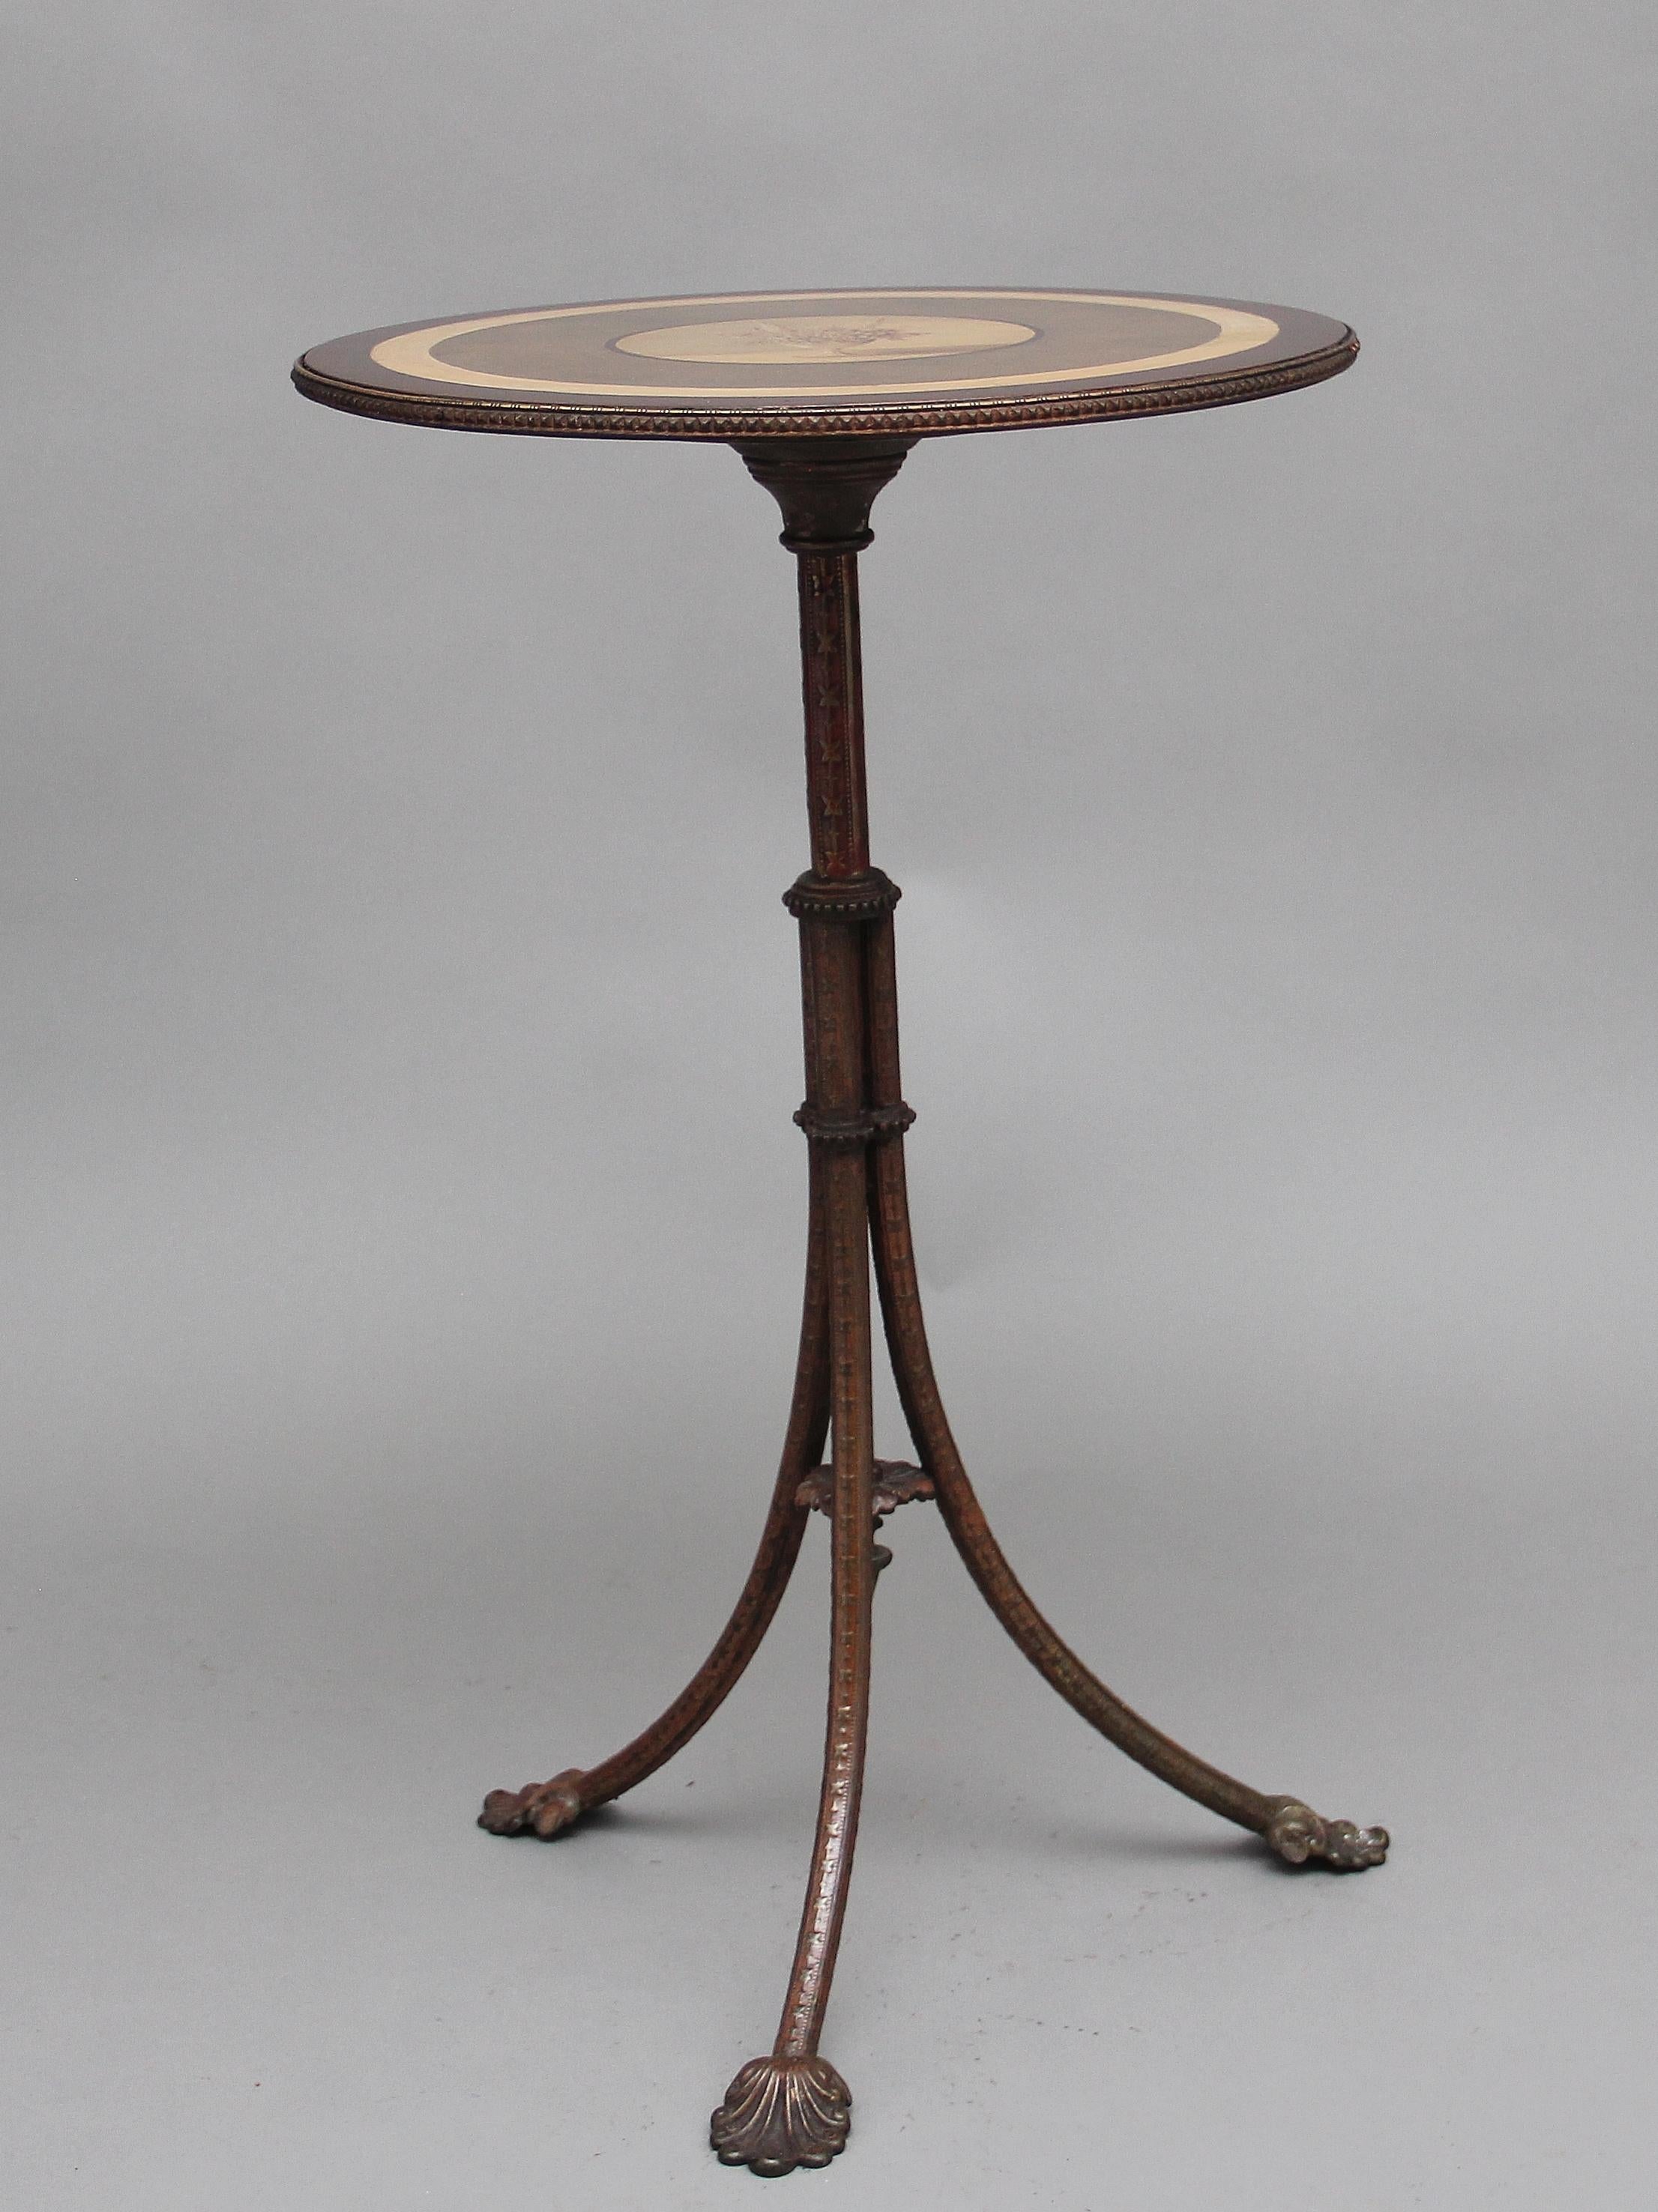 A decorative 19th century occasional table, the painted circular top having various painted boarders and a floral decoration at the centre, the edge of the top having brass decoration, the top supported on a tri form brass base with finely carved